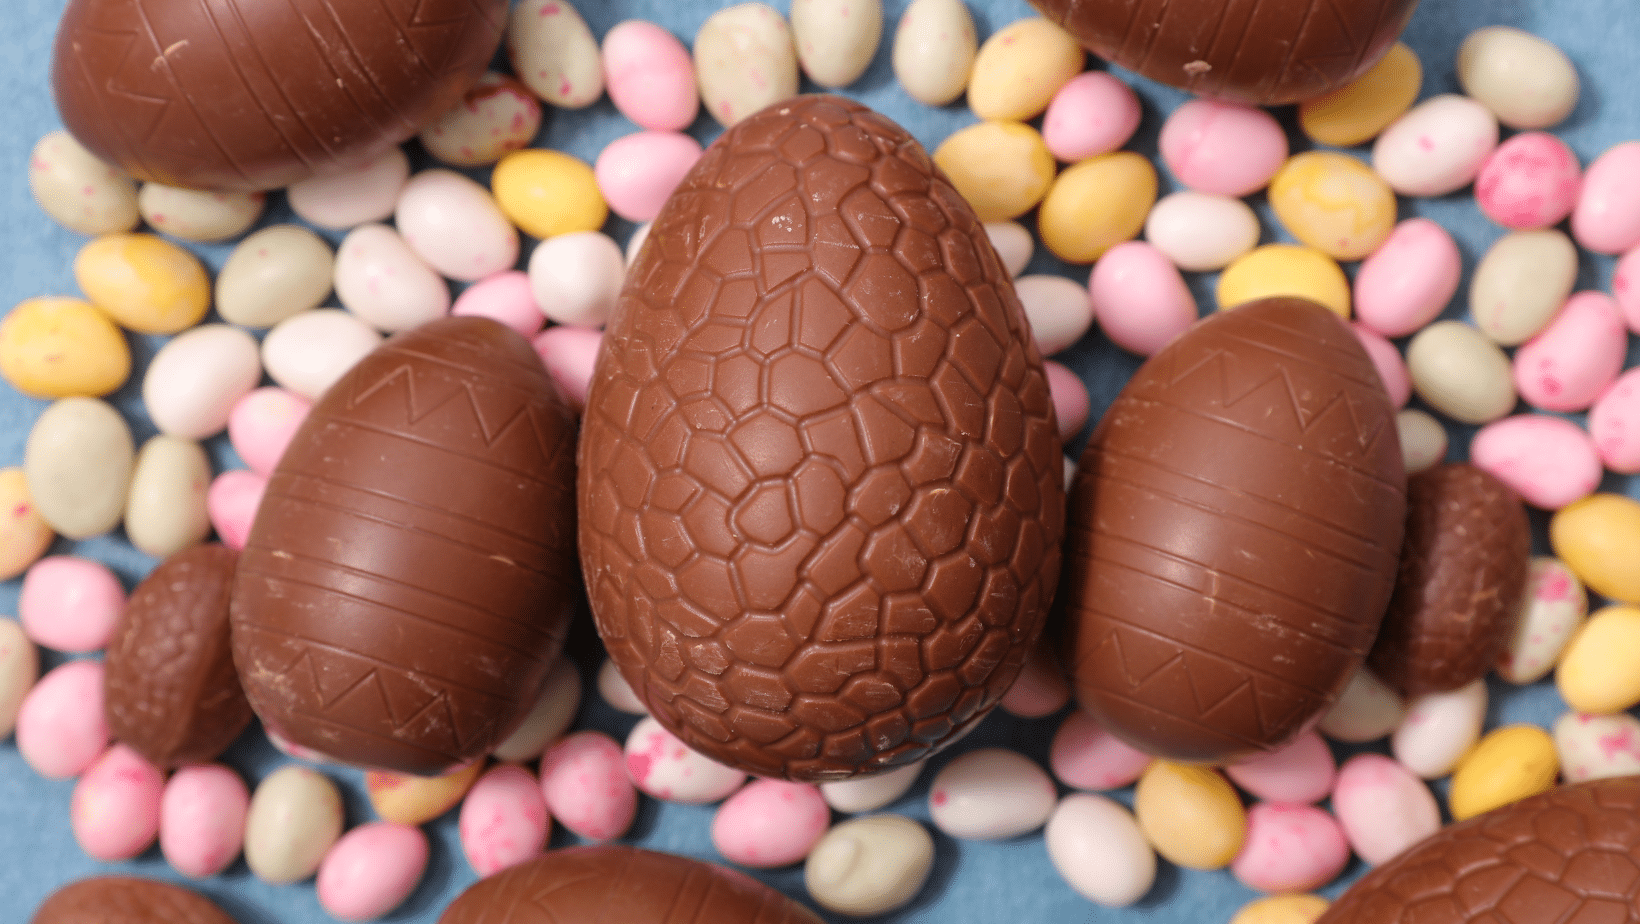 Three large chocolate Easter eggs surrounded by smaller Easter eggs